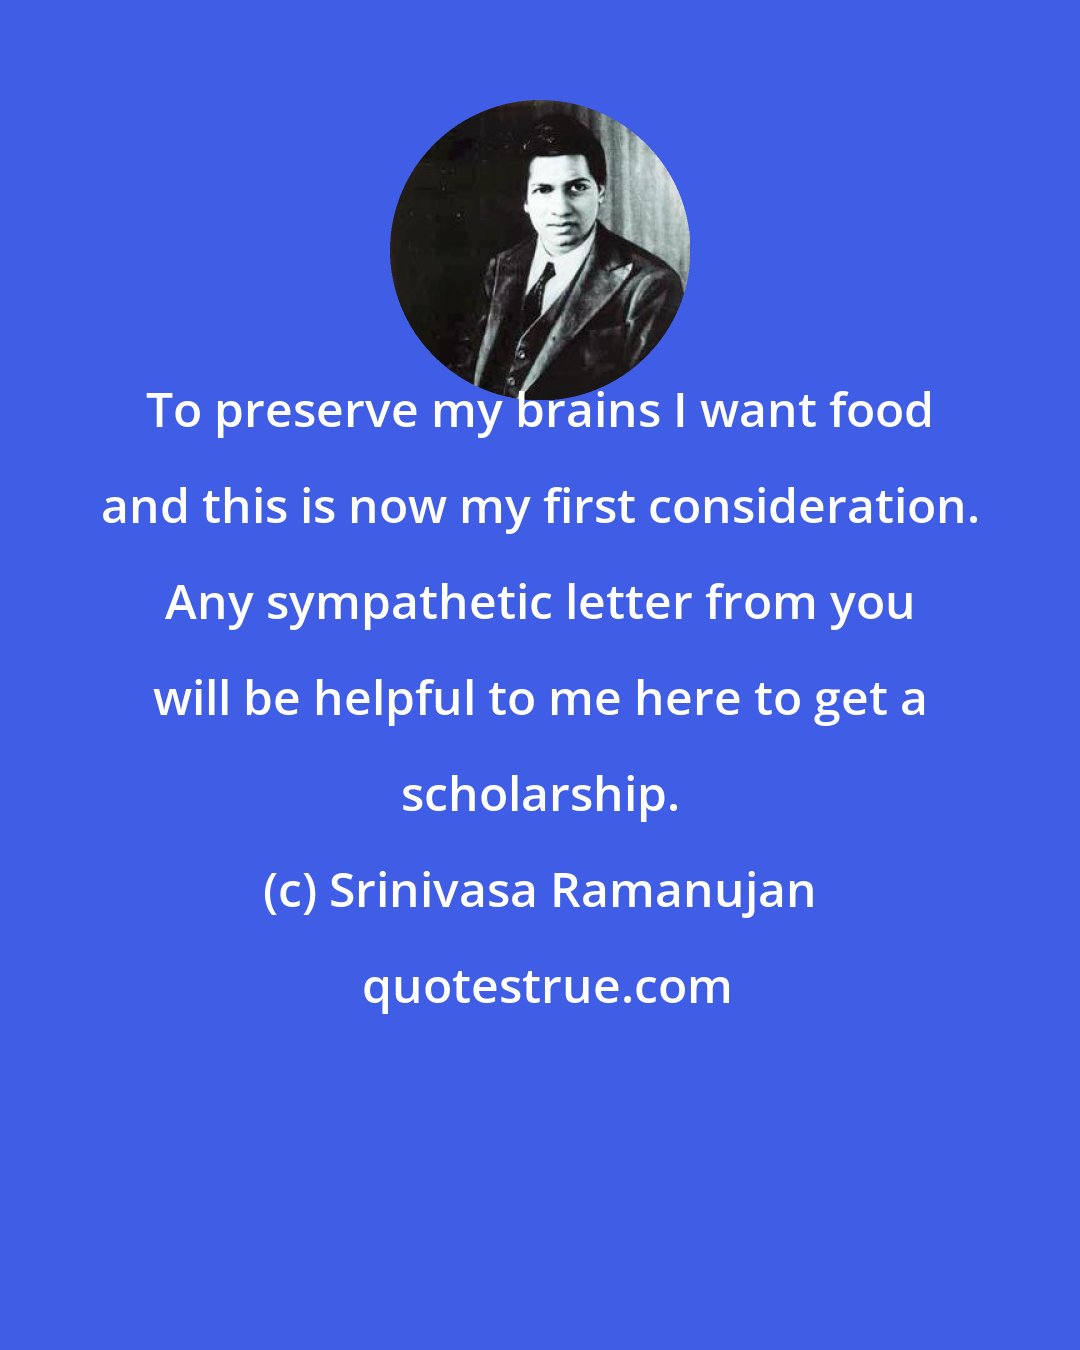 Srinivasa Ramanujan: To preserve my brains I want food and this is now my first consideration. Any sympathetic letter from you will be helpful to me here to get a scholarship.